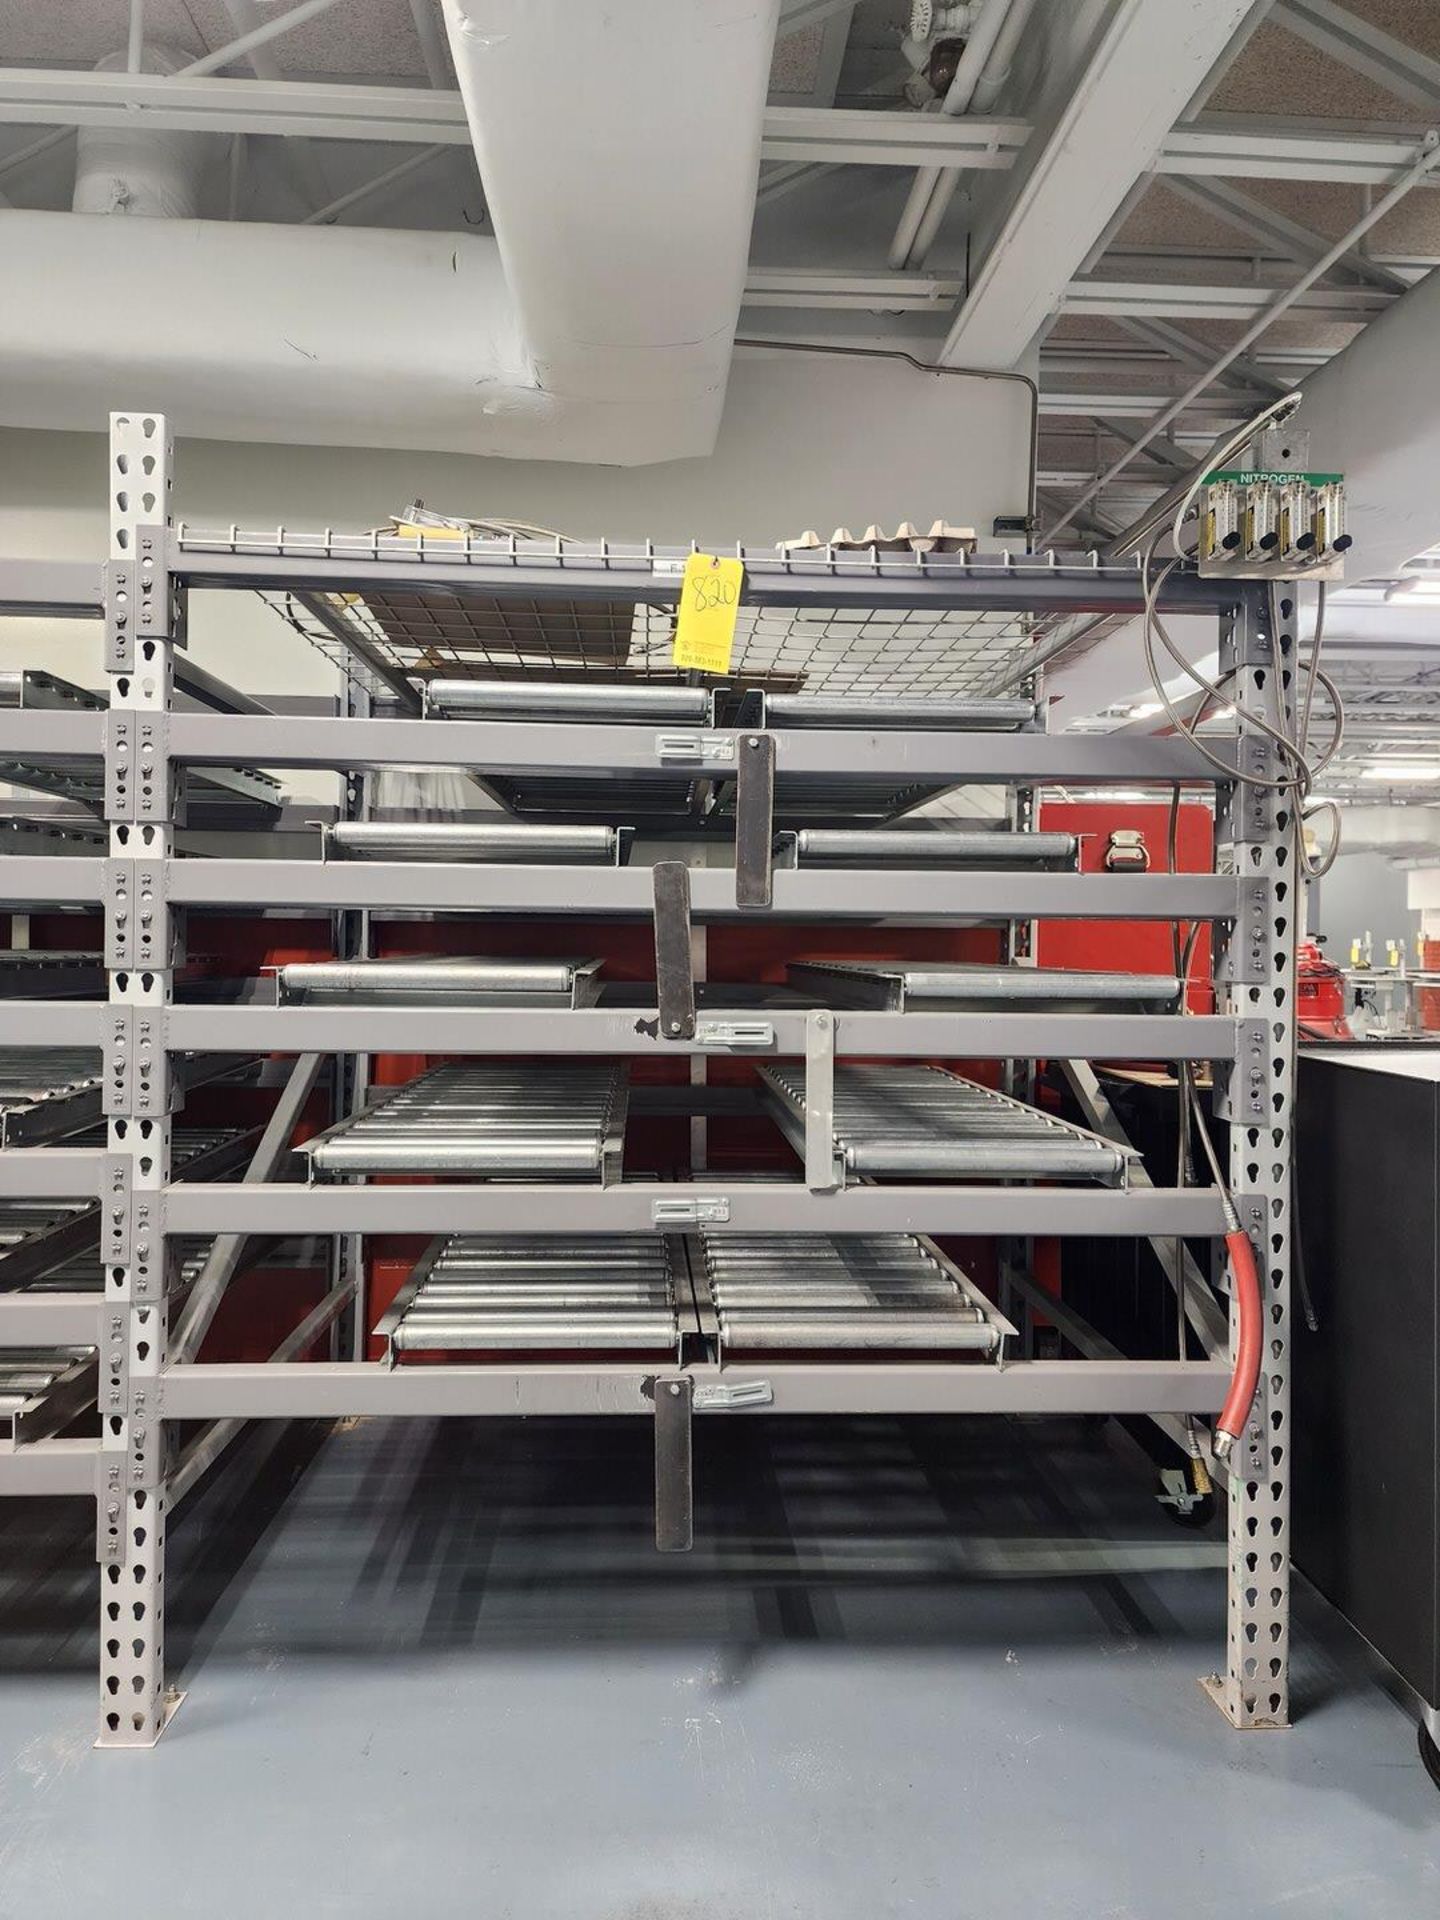 Roller Conveyer Material Rack Unit 252" x 51" x 72"H - Image 9 of 9